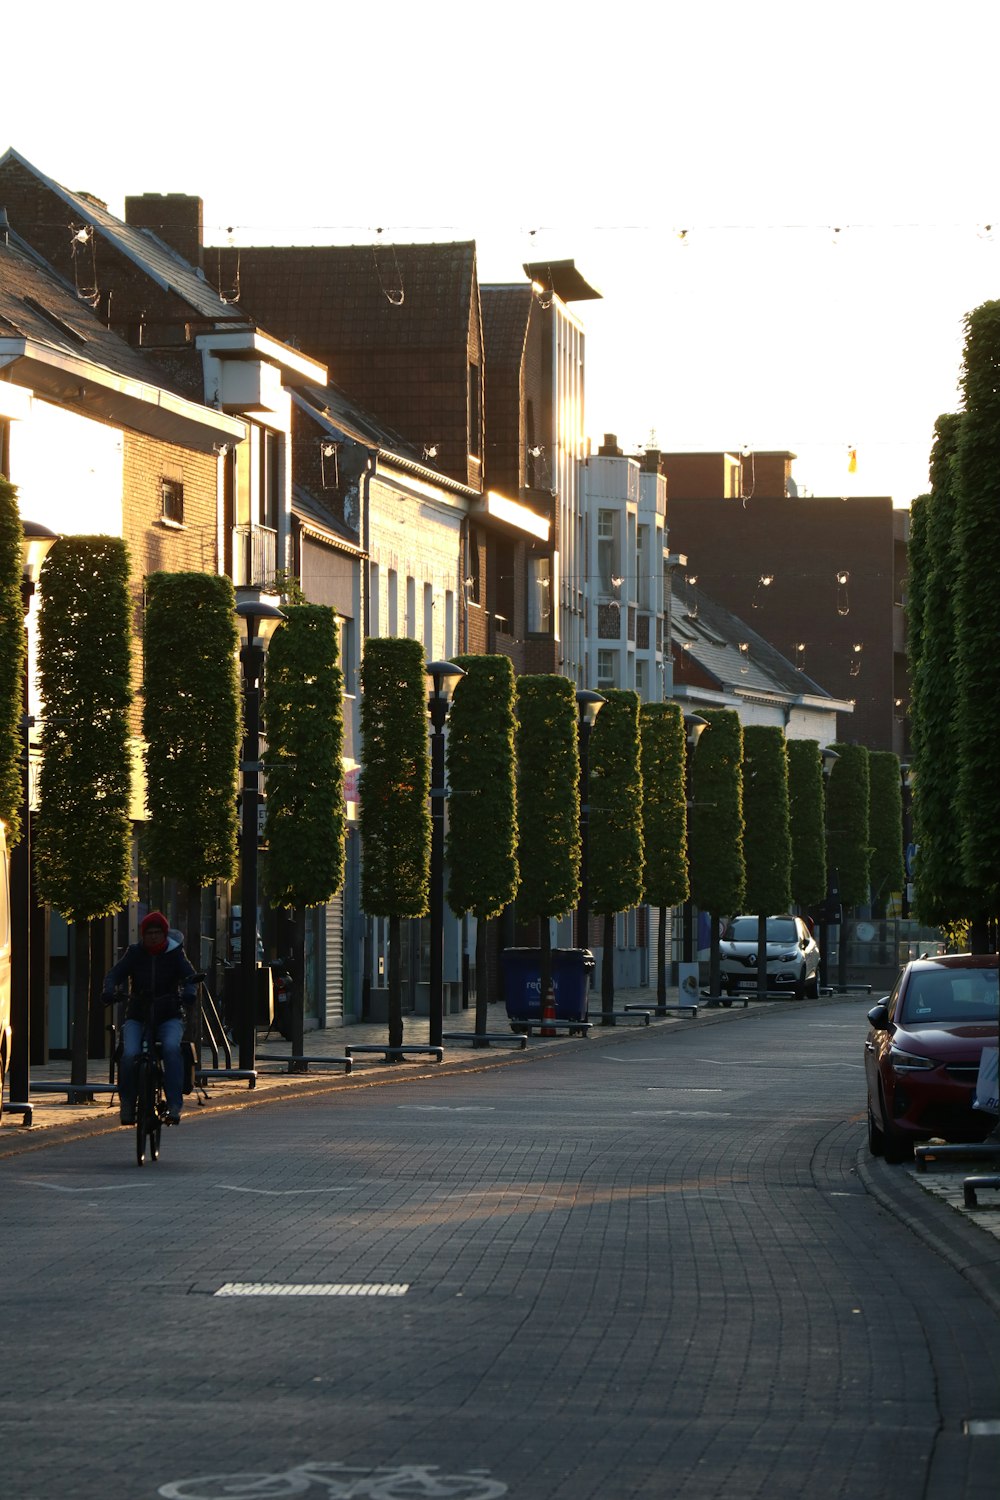 a person riding a bicycle on a street lined with trees